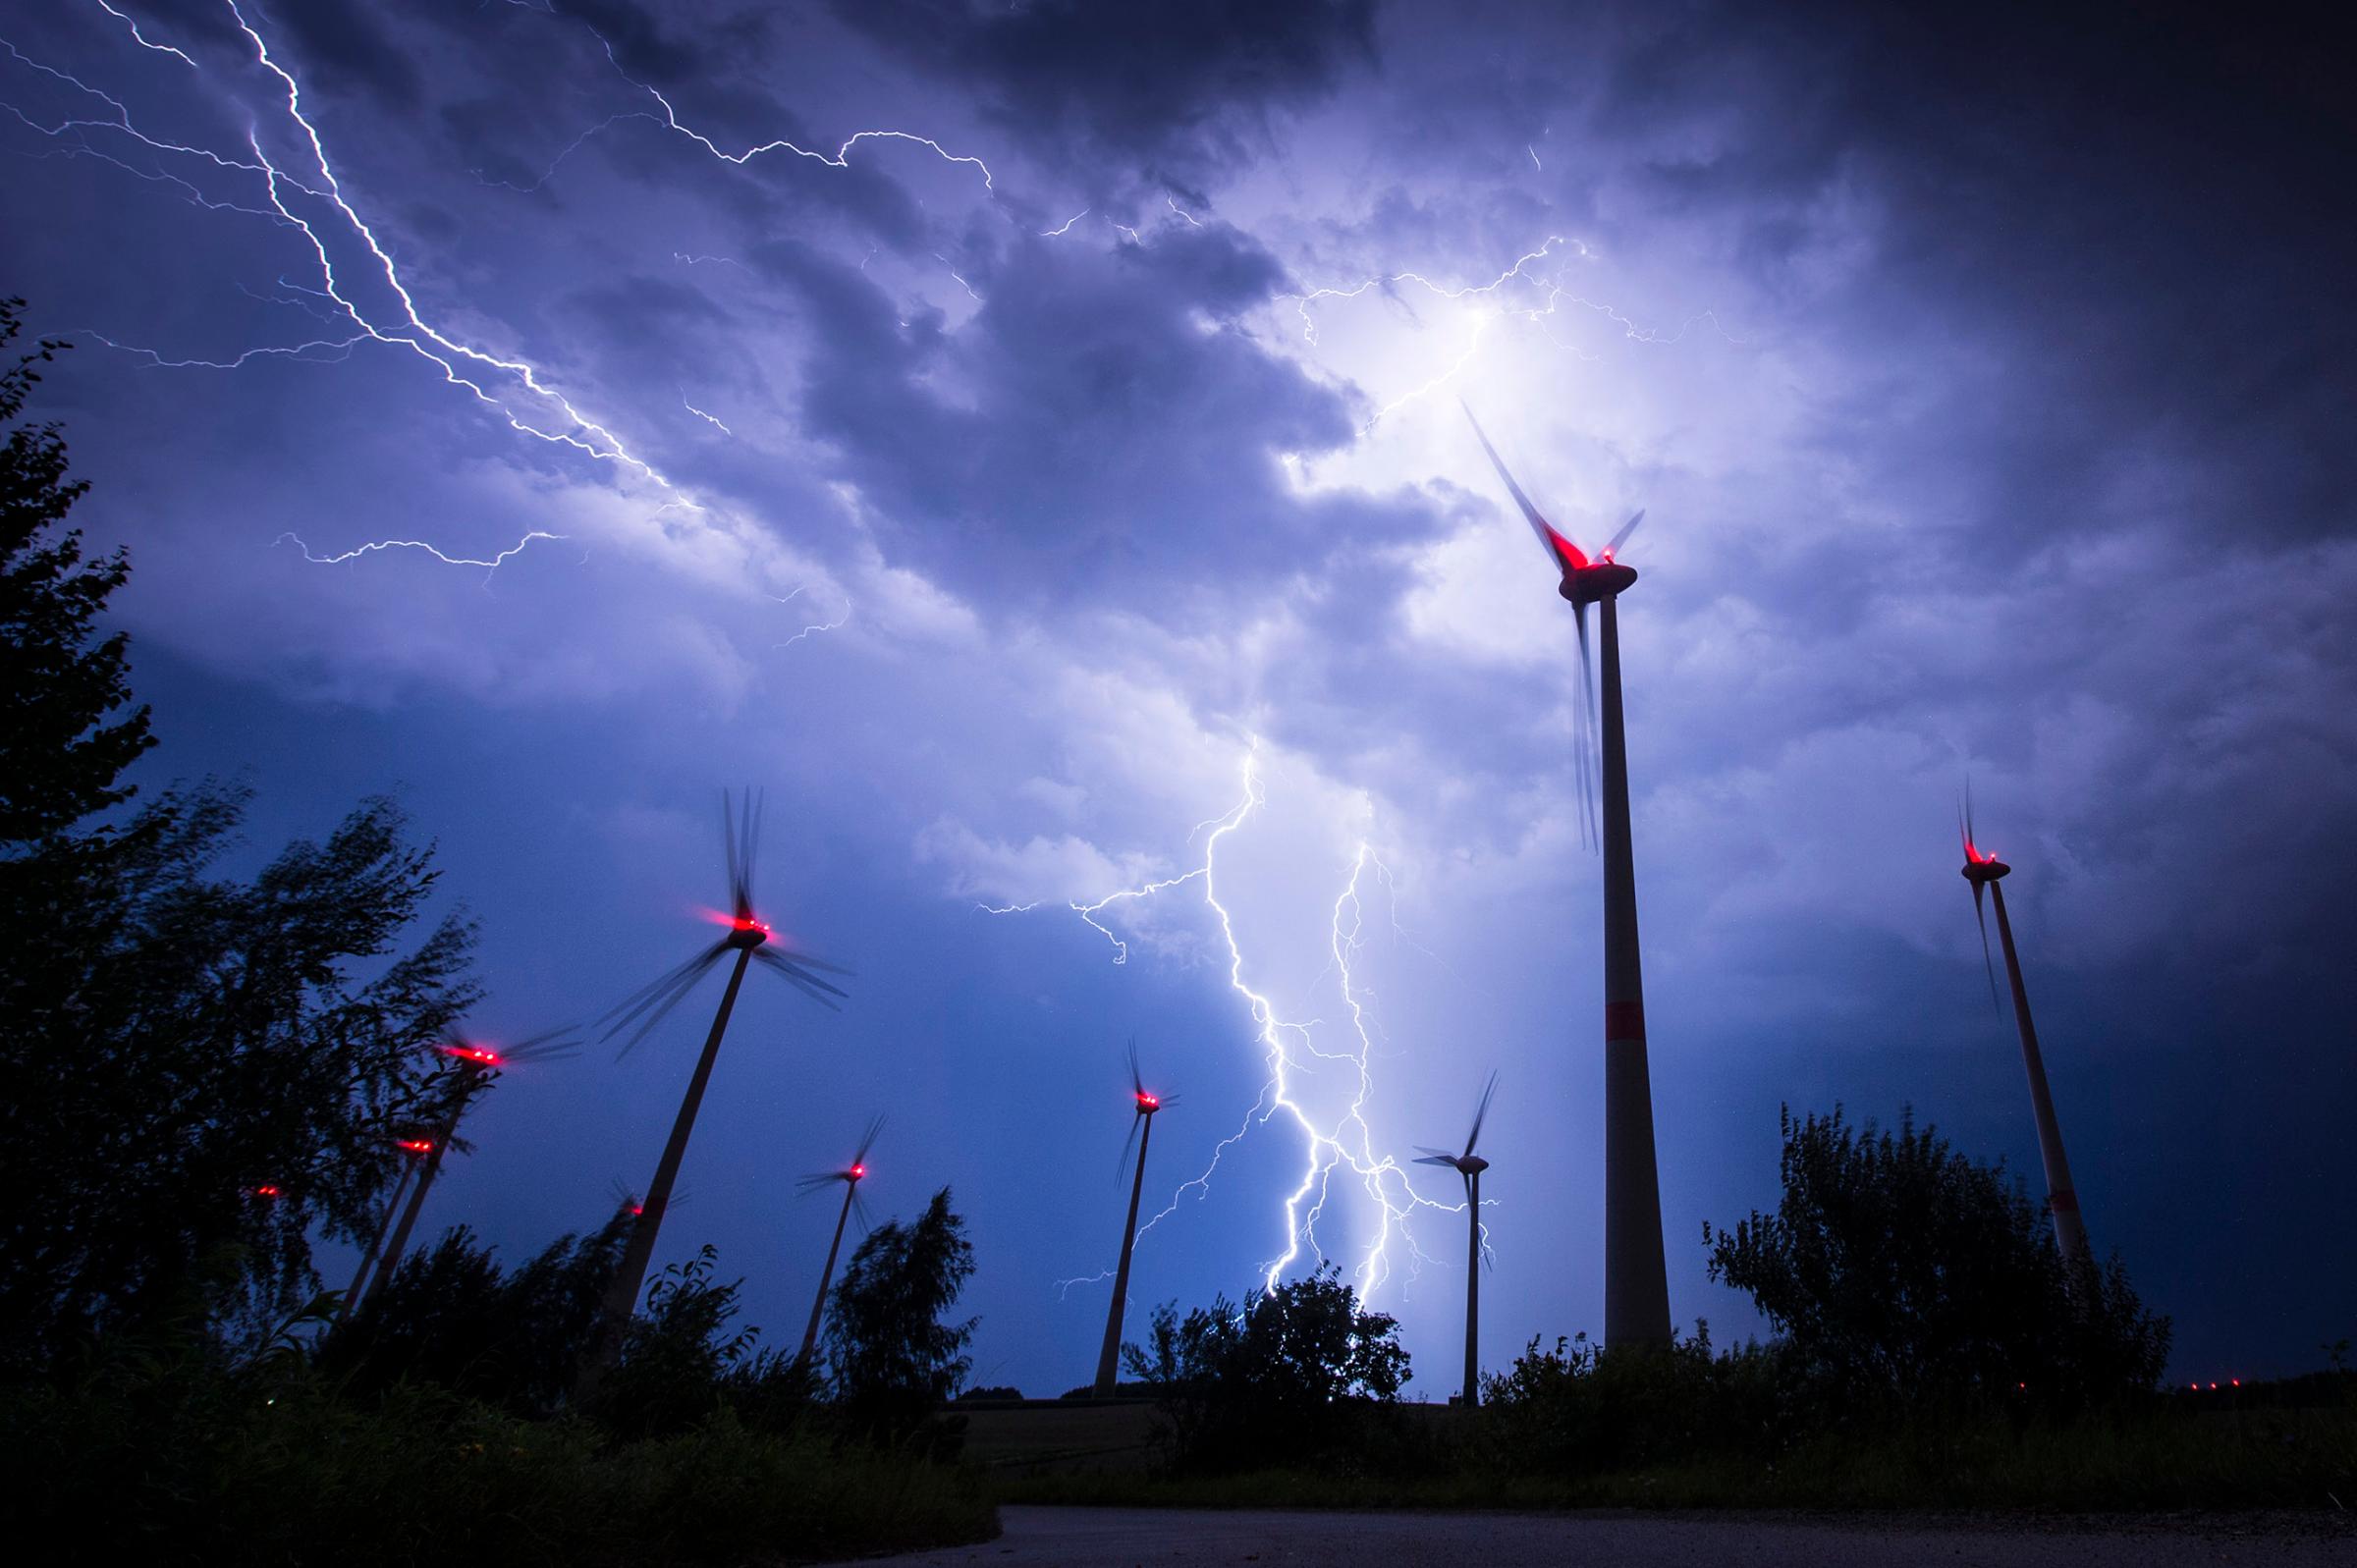 Lightning strikes behind wind turbines during a thunderstorm in Goerlitz, Germany, on Aug. 28, 2016.